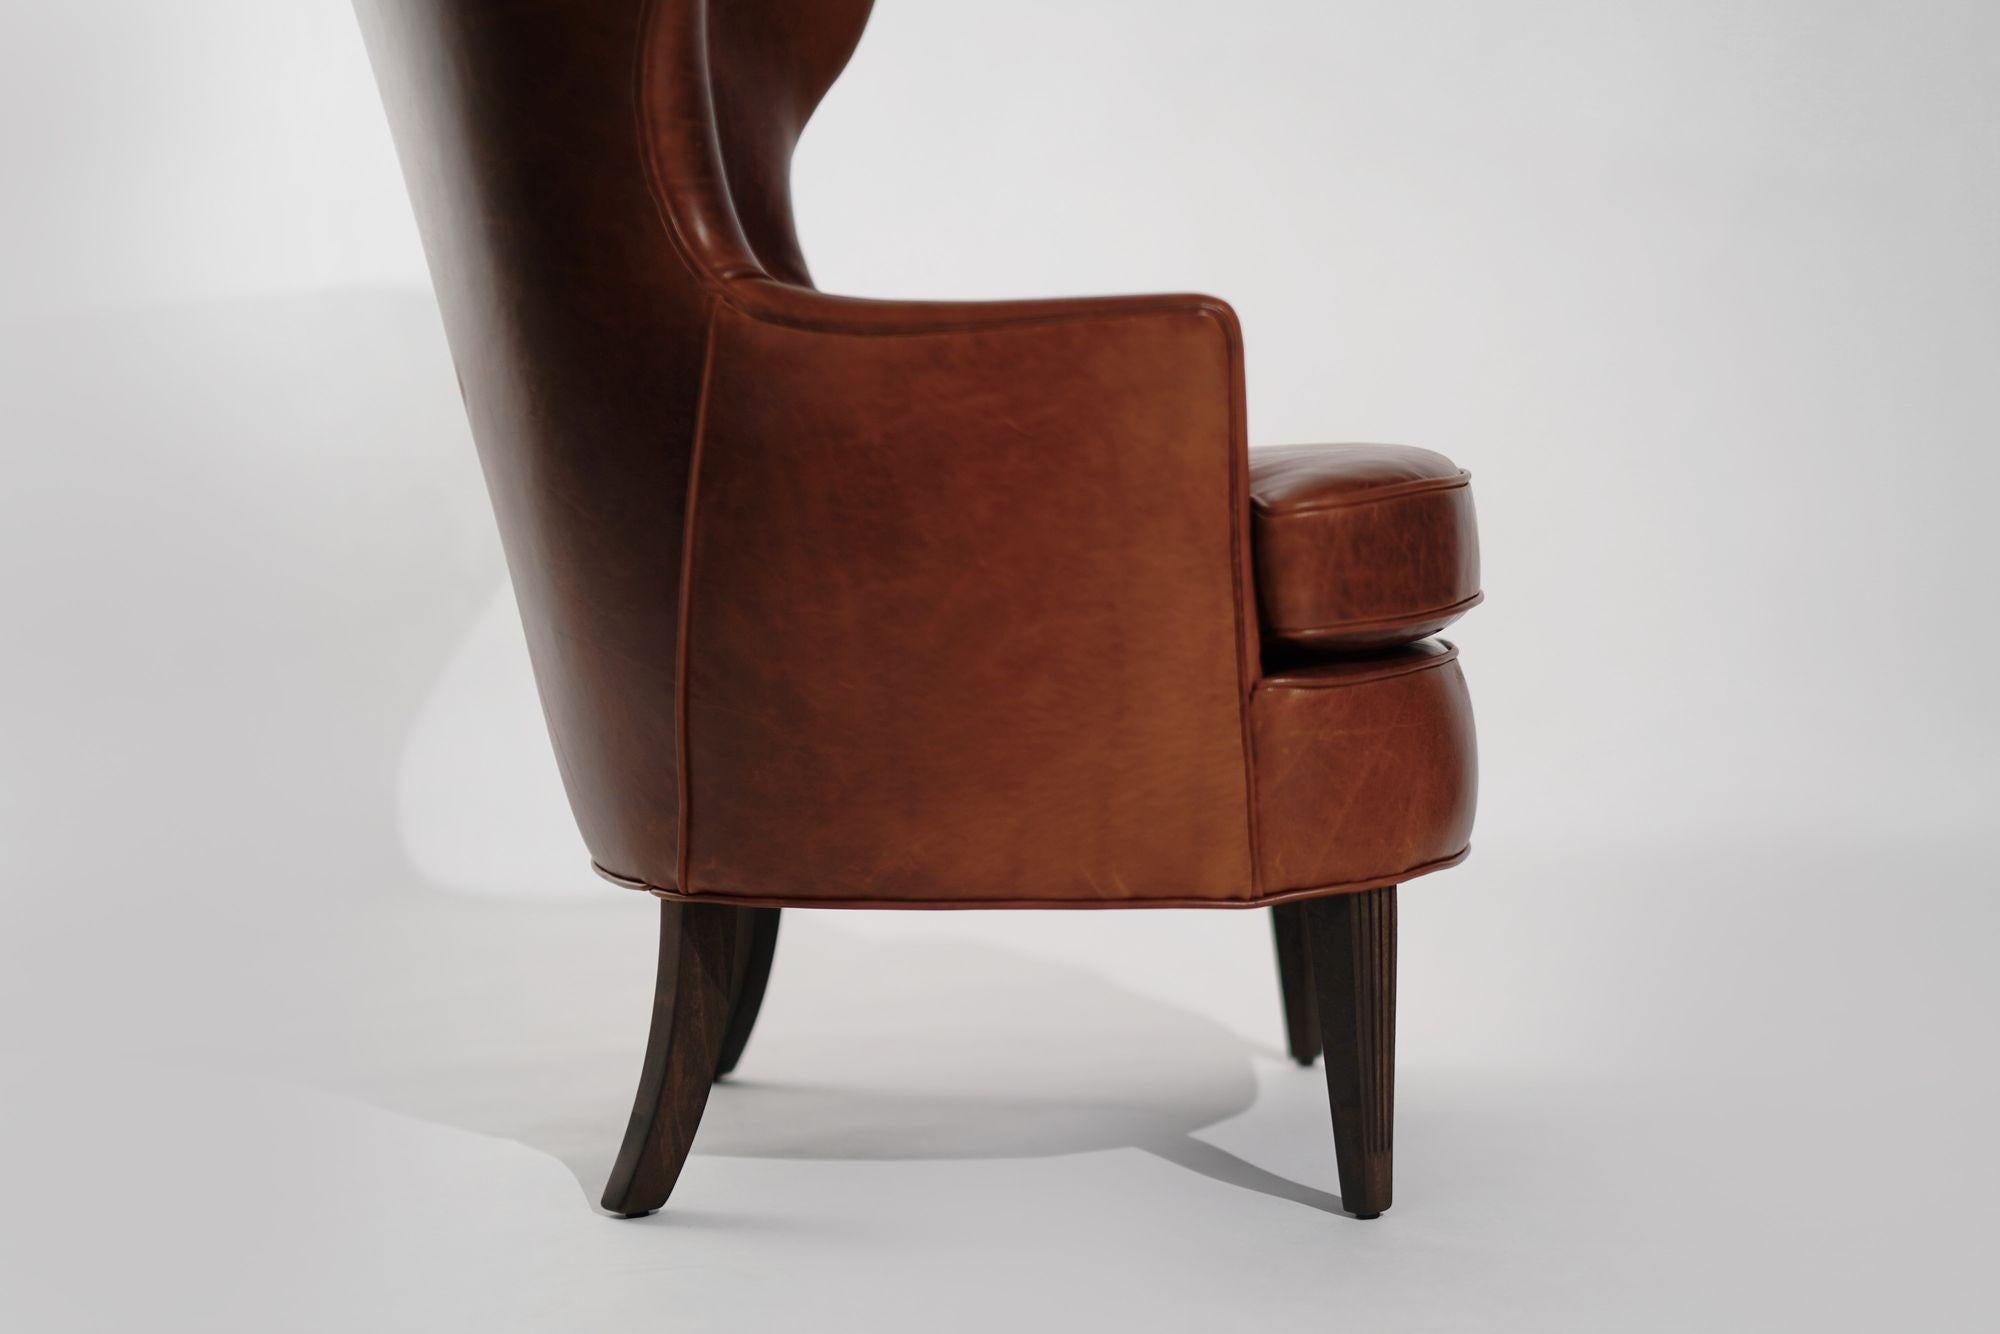 Vintage Wingback Chair in Cognac Leather, C. 1950s For Sale 3